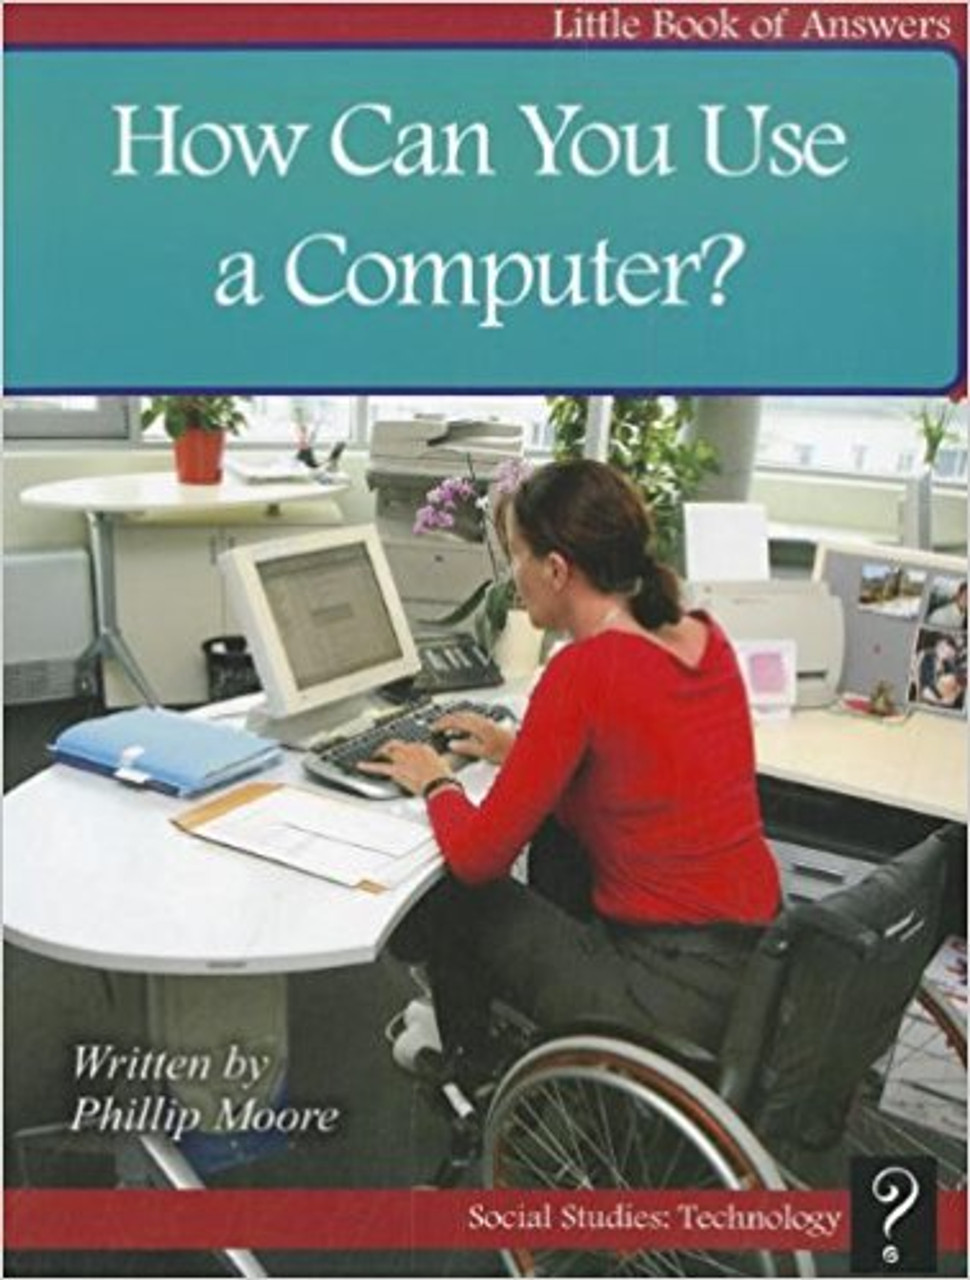 How Can You Use a Computer? by Philip Moore